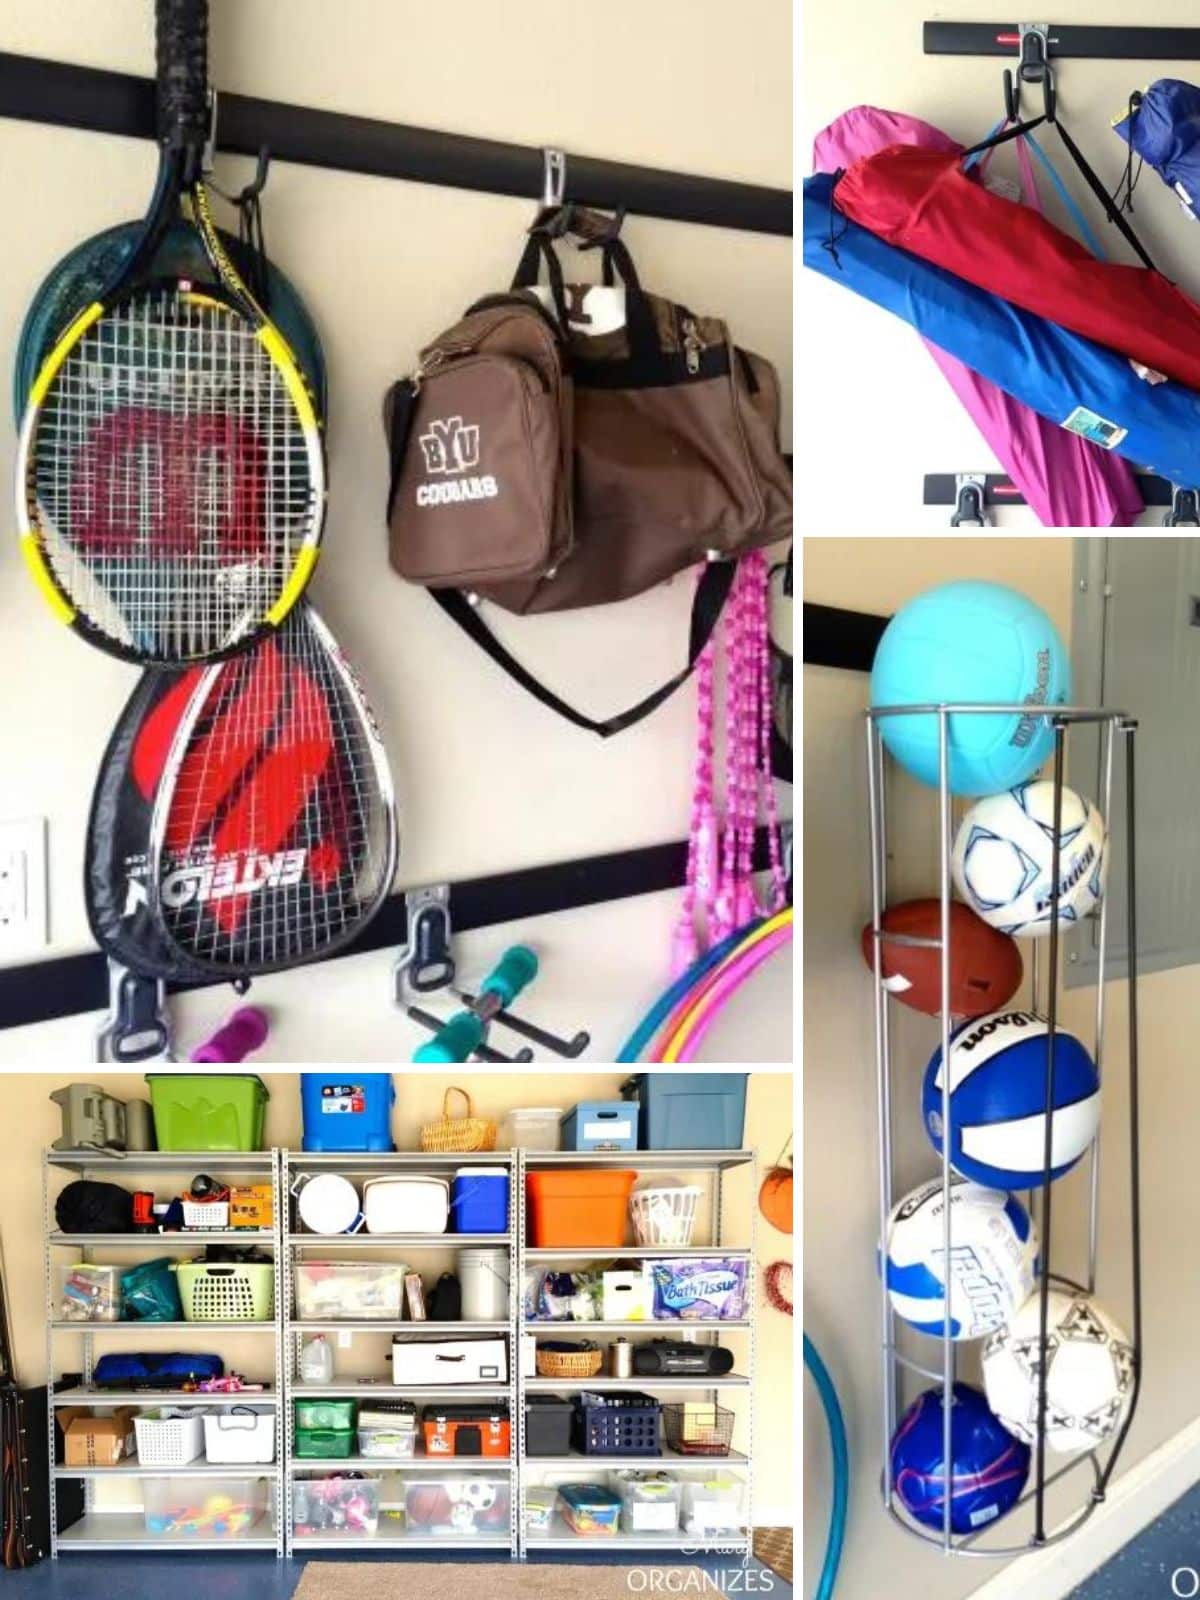 Garage Organization for Real Families 